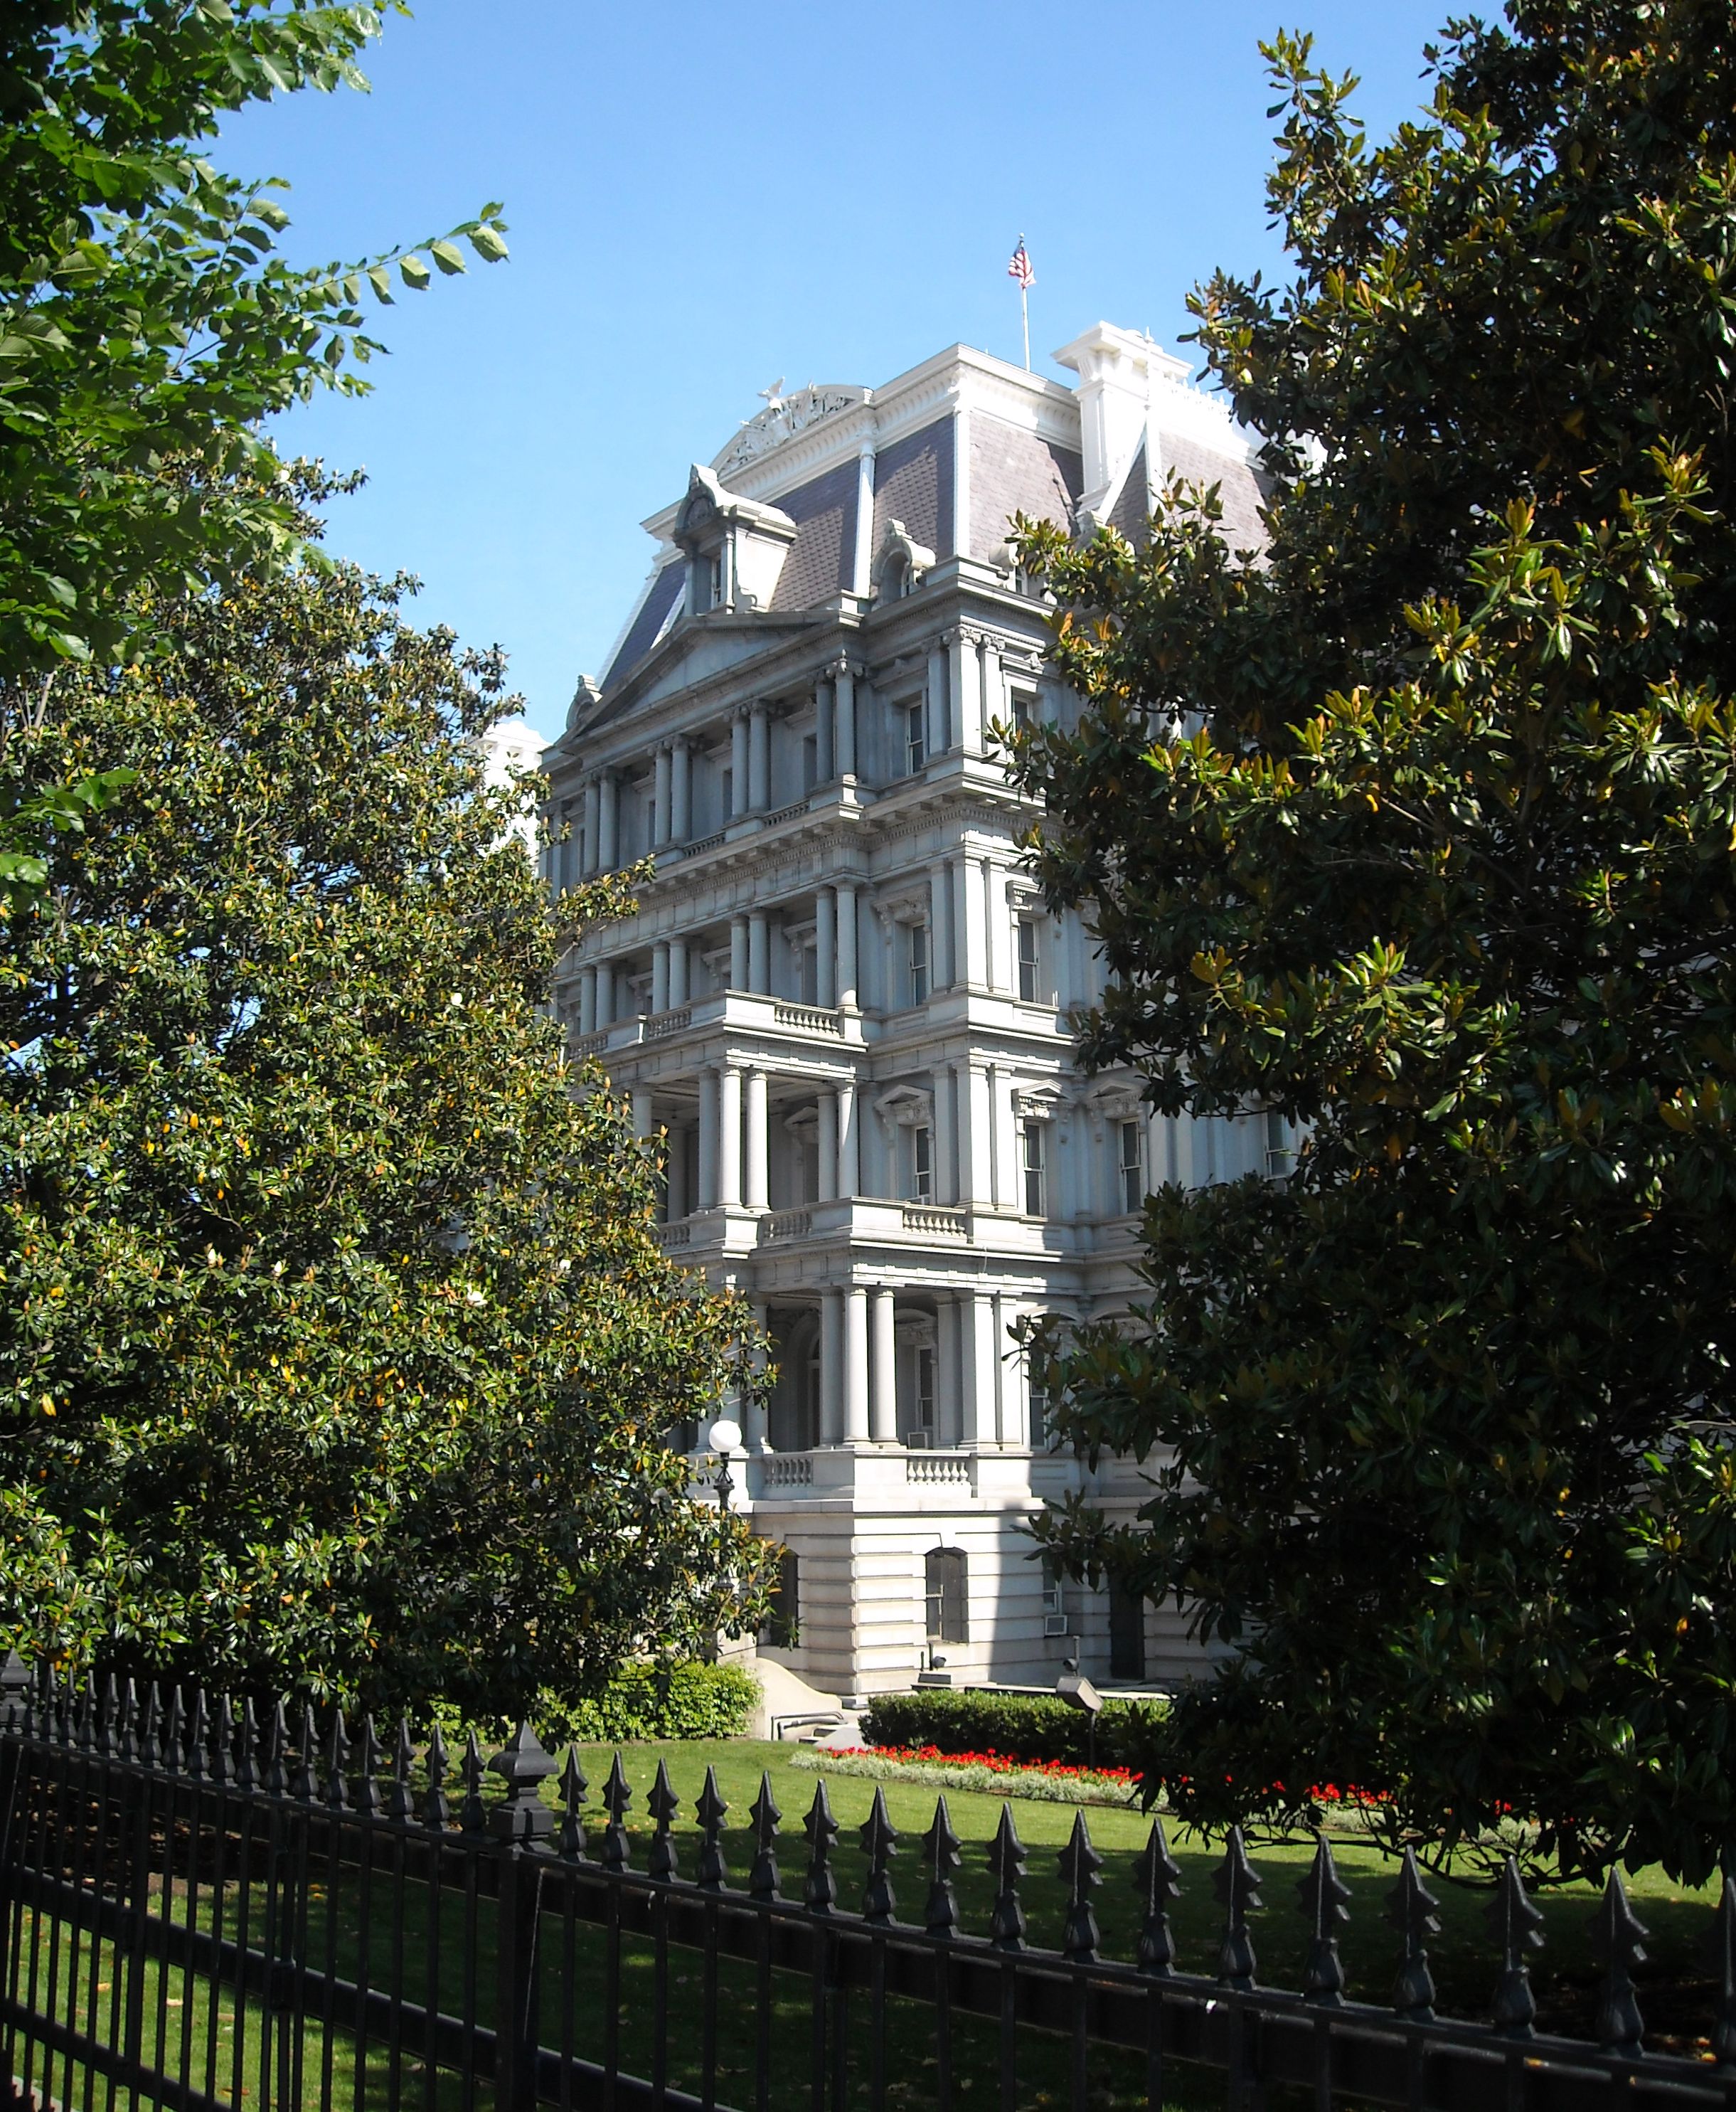 File:Executive Office Building trees.JPG - Wikimedia Commons